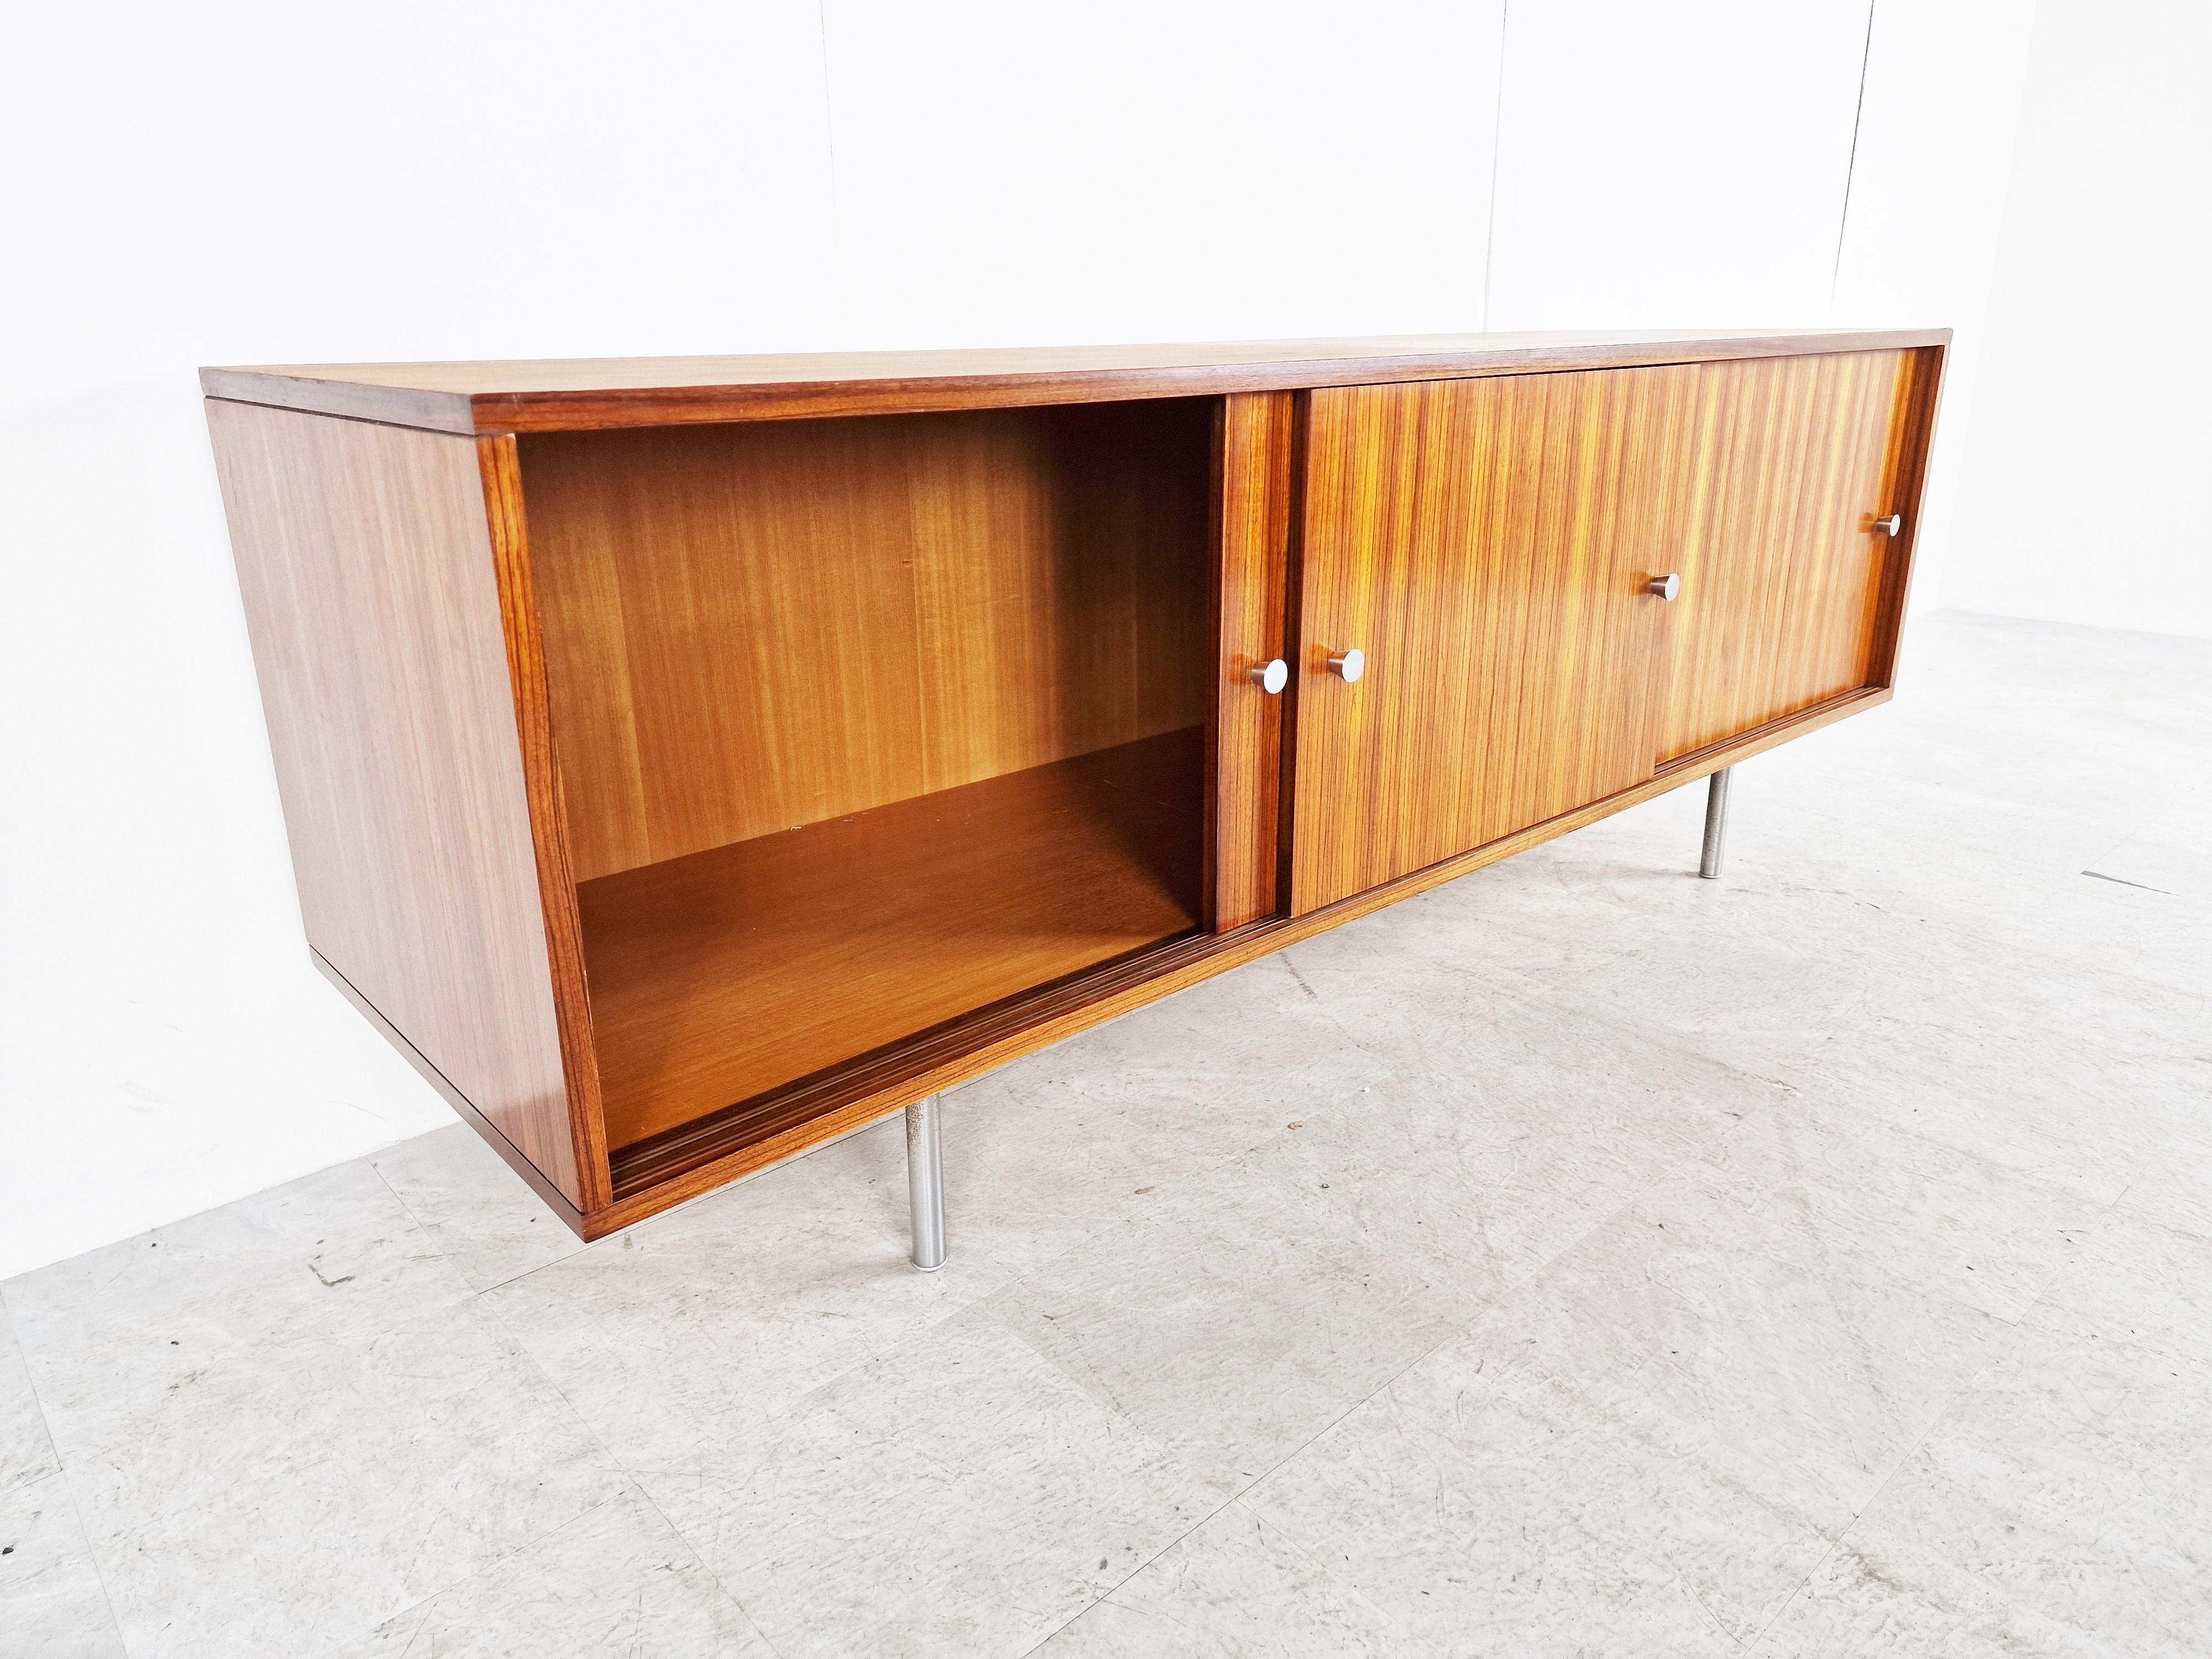 Timeless mid century sideboard by Alfred Hendrickx.

The sideboard offers a lot of storage space, because it's deeper then most sideboards.

It has three sliding doors.

1960s - Belgium

Overall good condition, some discolouring on the